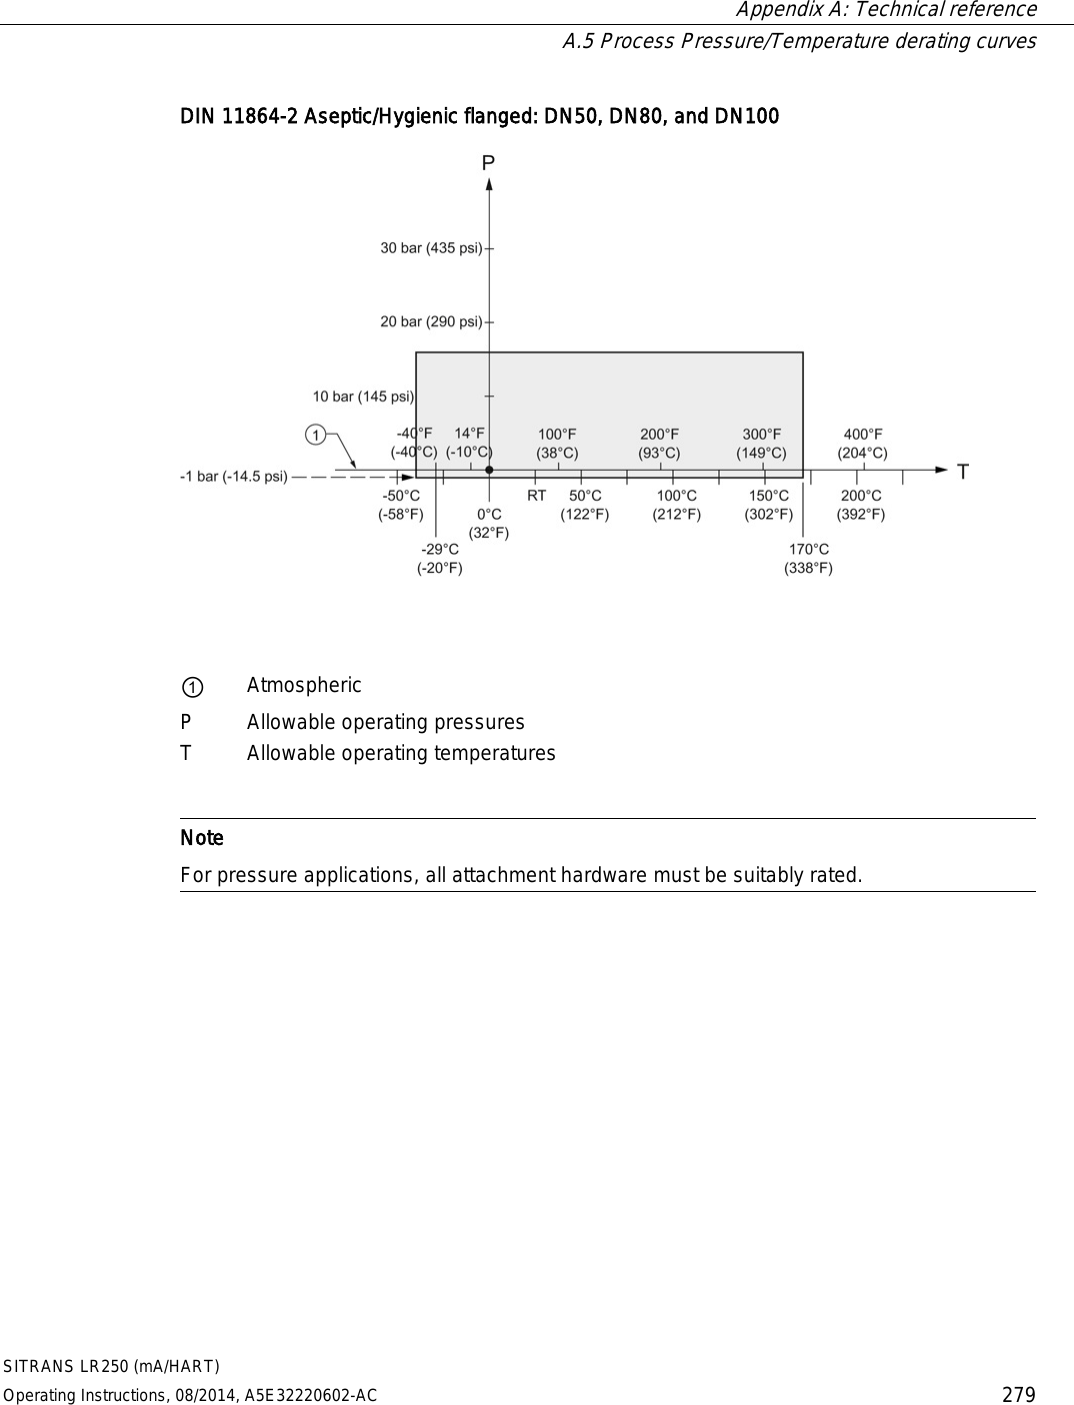  Appendix A: Technical reference  A.5 Process Pressure/Temperature derating curves SITRANS LR250 (mA/HART) Operating Instructions, 08/2014, A5E32220602-AC 279 DIN 11864-2 Aseptic/Hygienic flanged: DN50, DN80, and DN100   ① Atmospheric P Allowable operating pressures T Allowable operating temperatures    Note For pressure applications, all attachment hardware must be suitably rated.  